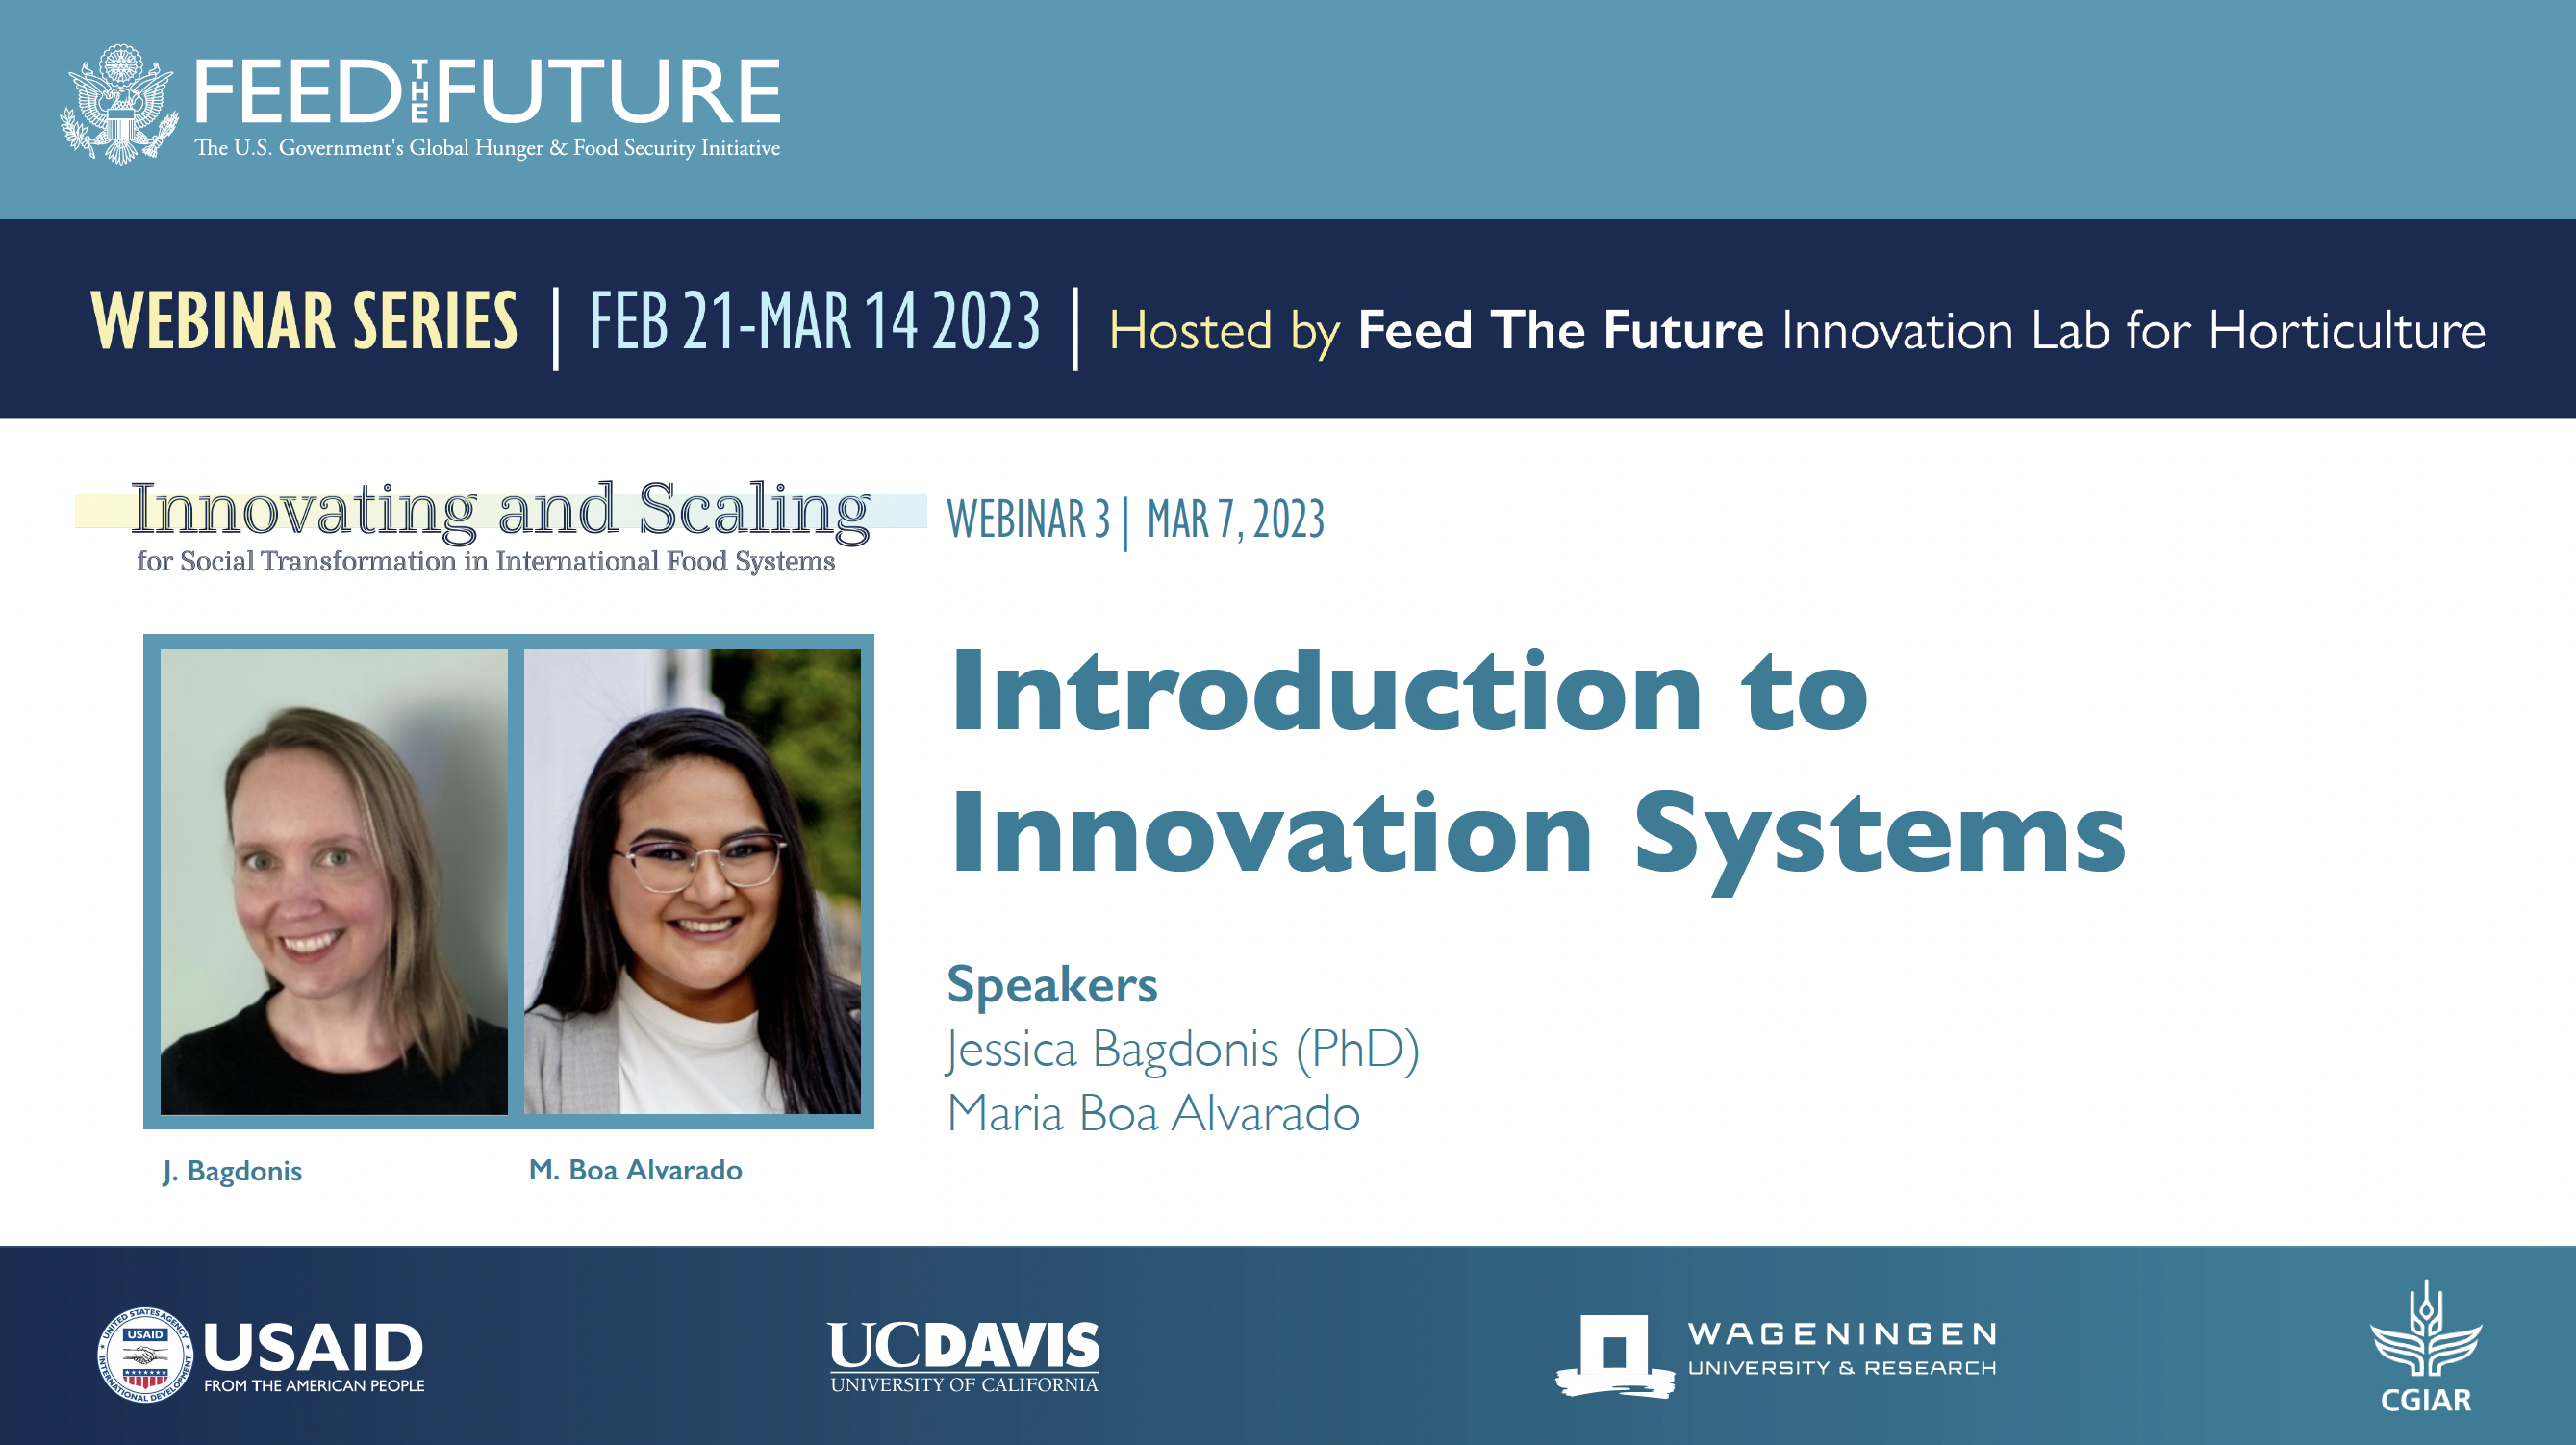 Webinar 3: Introduction to Innovation Systems